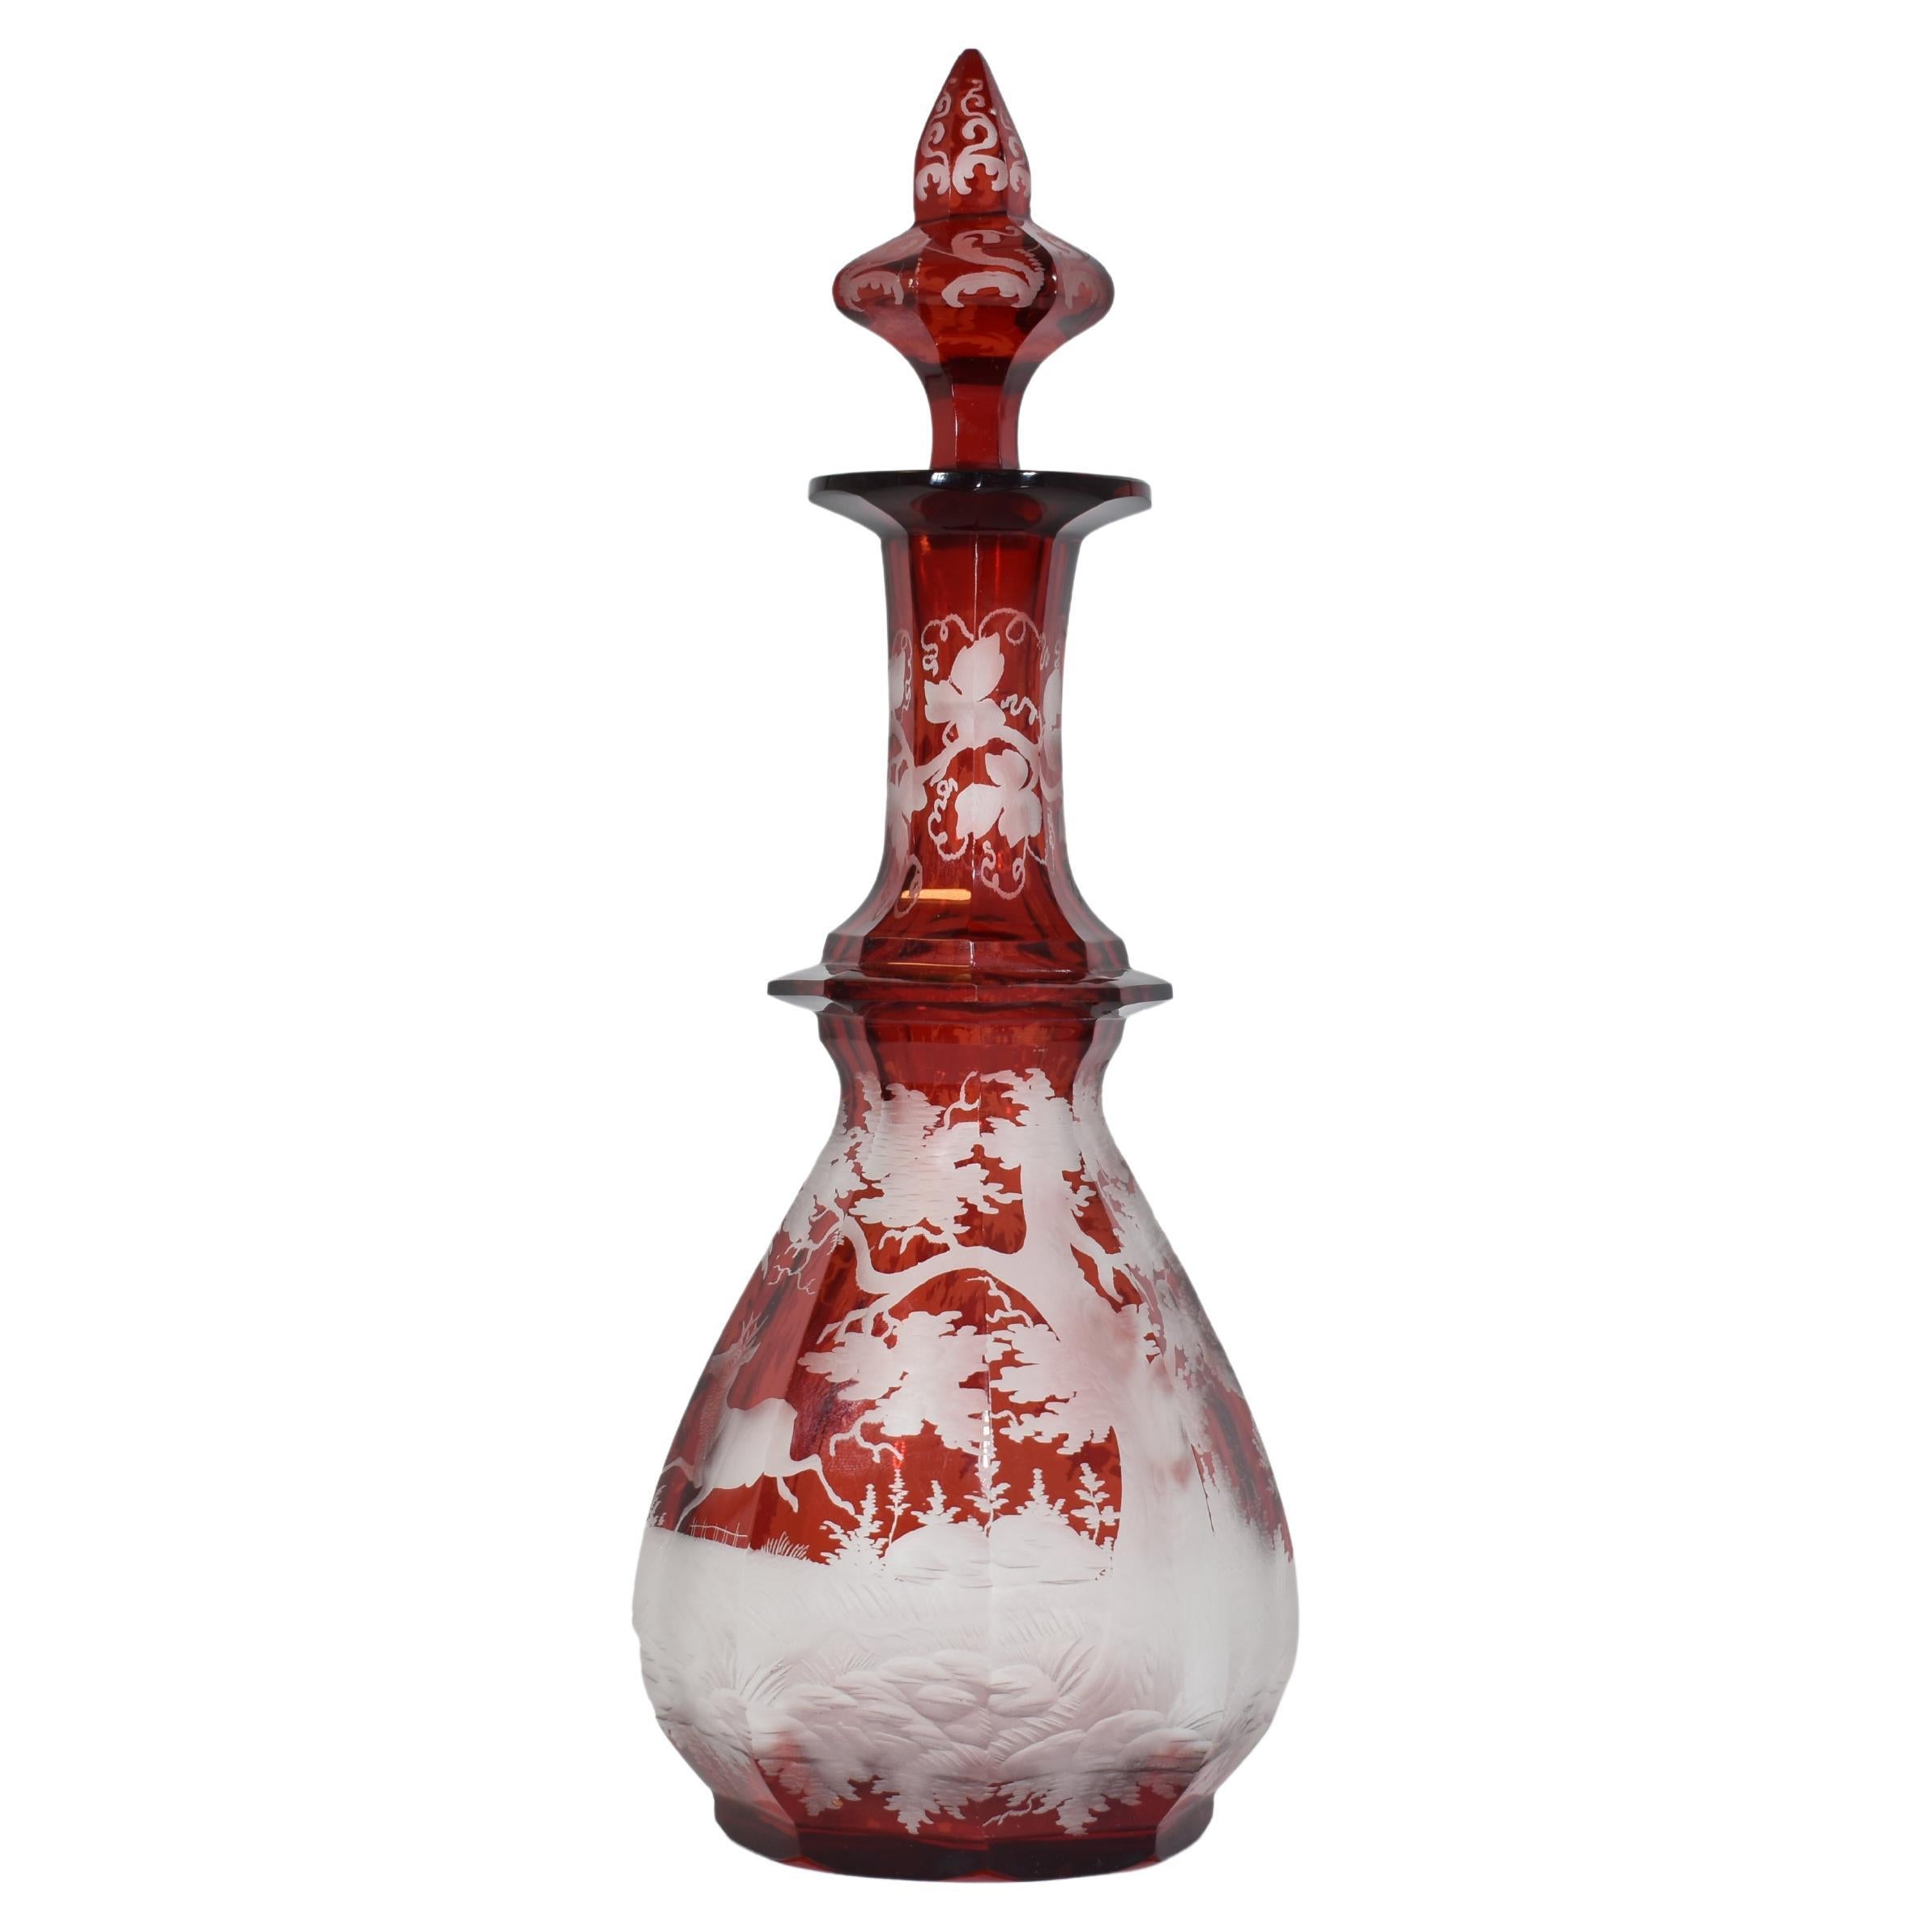 Rare ruby perfume bottle made of high quality Bohemian Cut glass with engraving work

continuous scene of a deer in the forest, further engravings on the neck and stopper

H. 23 cm
Bohemia, 19th century.